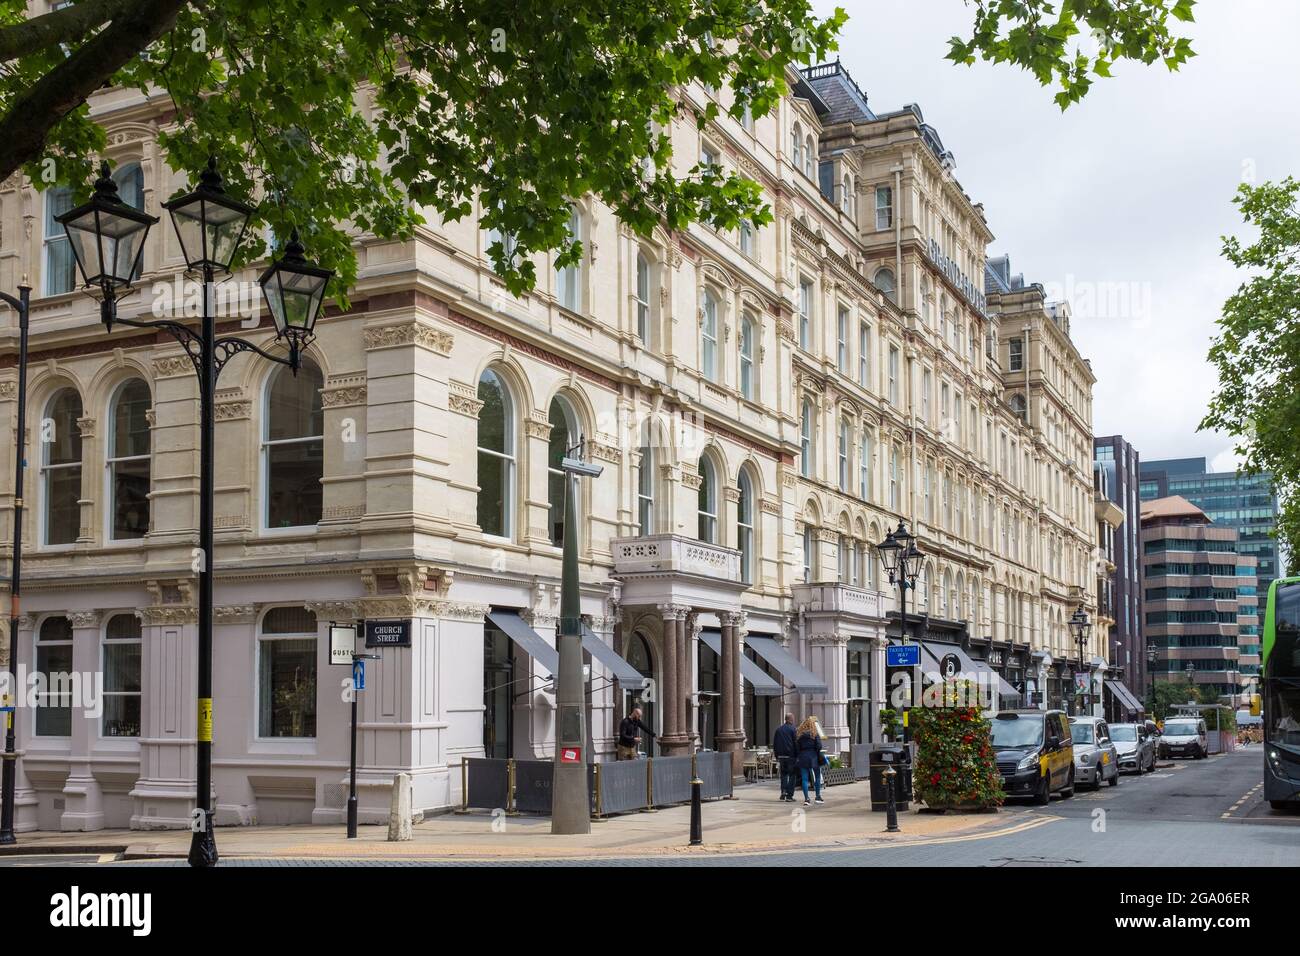 The Grand Hotel and Gusto restaurant on Colmore Row, Birmingham, UK Stock Photo